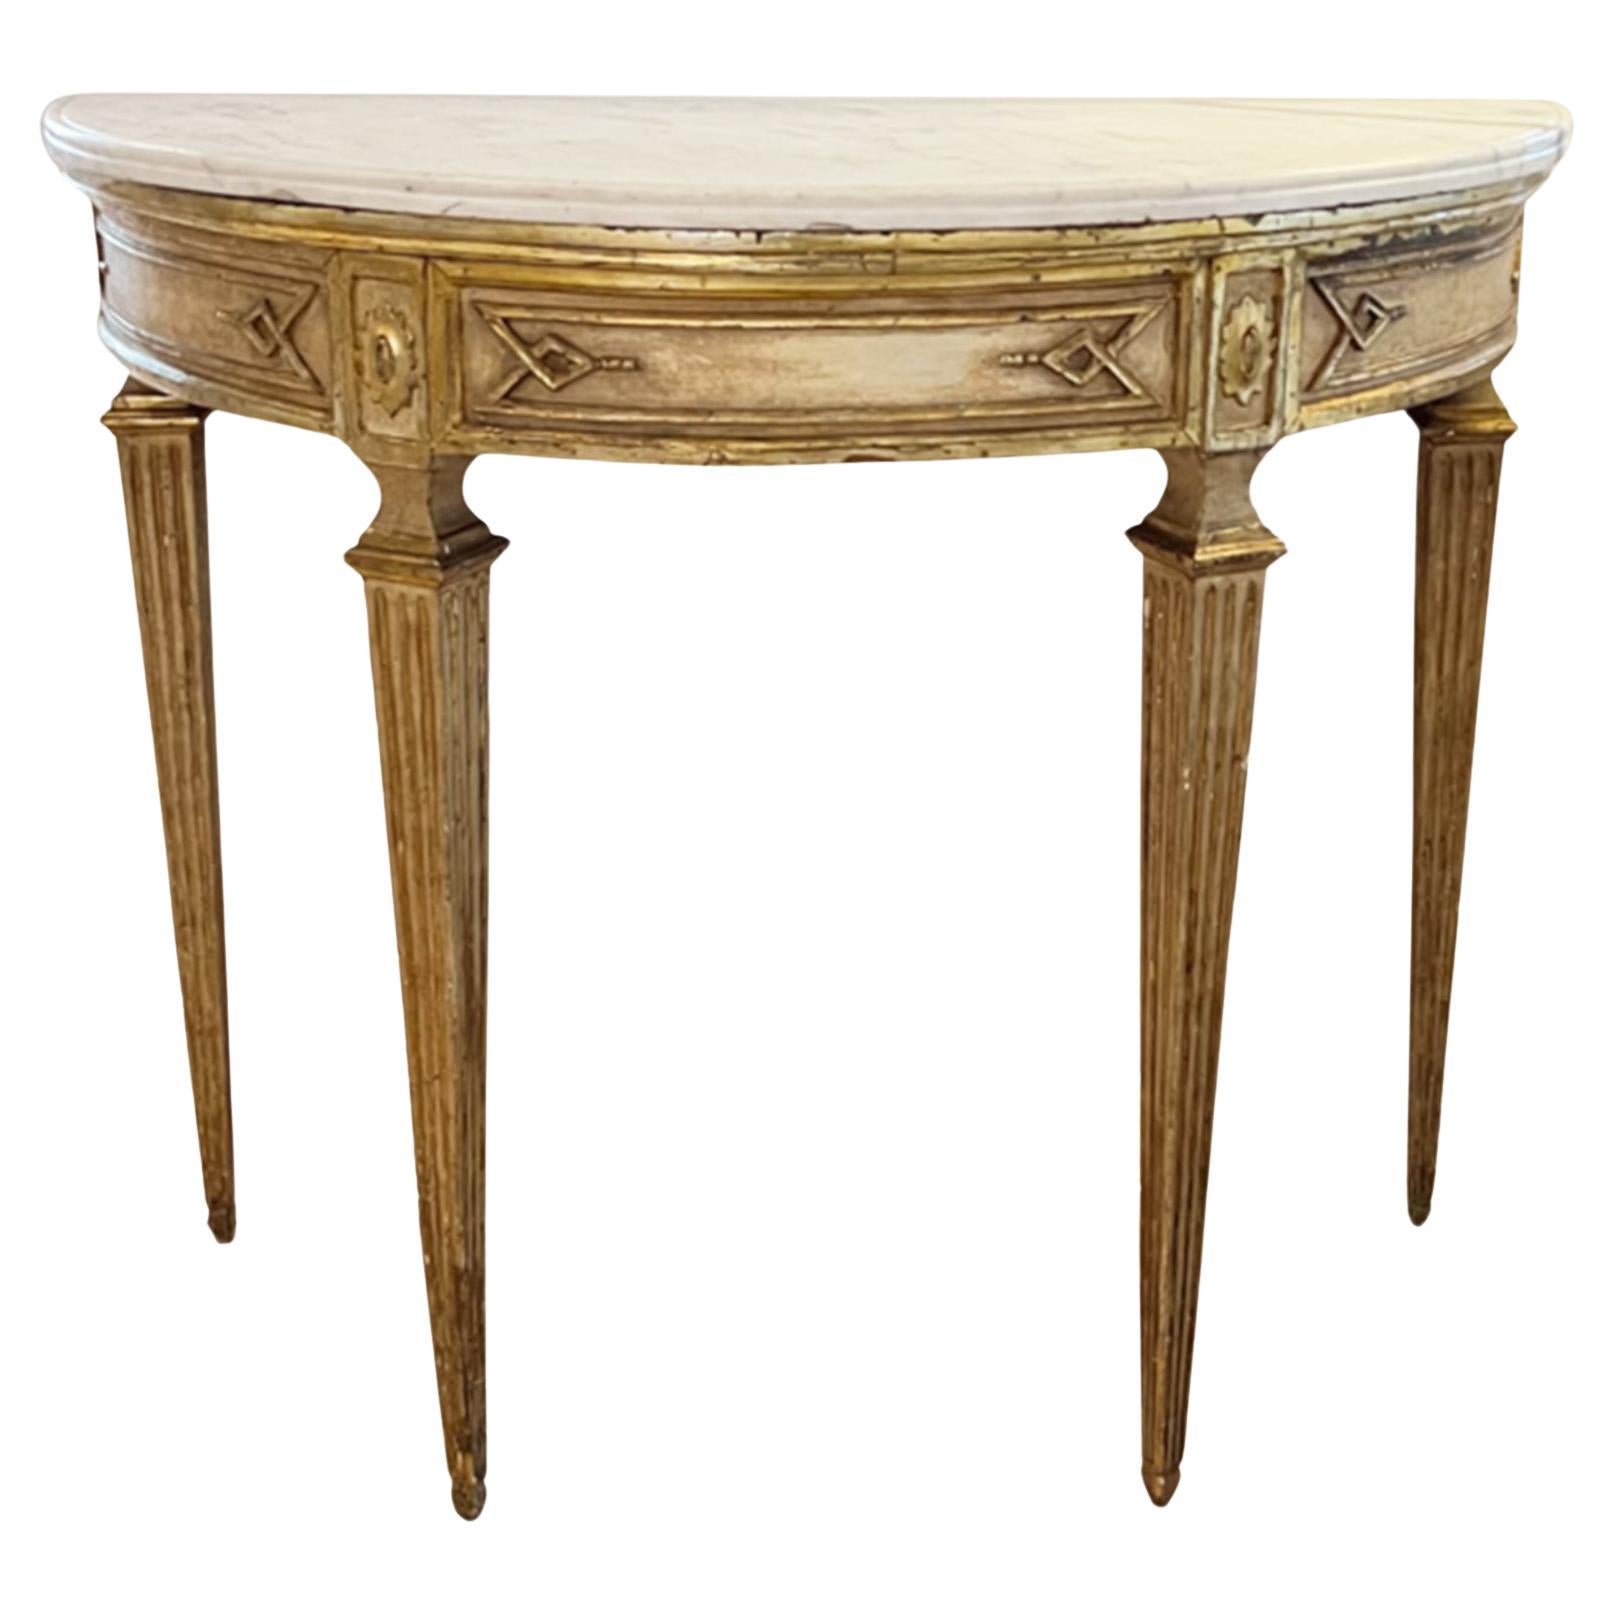 Italian Early 19th Century Giltwood Console Table With a Marble Top For Sale